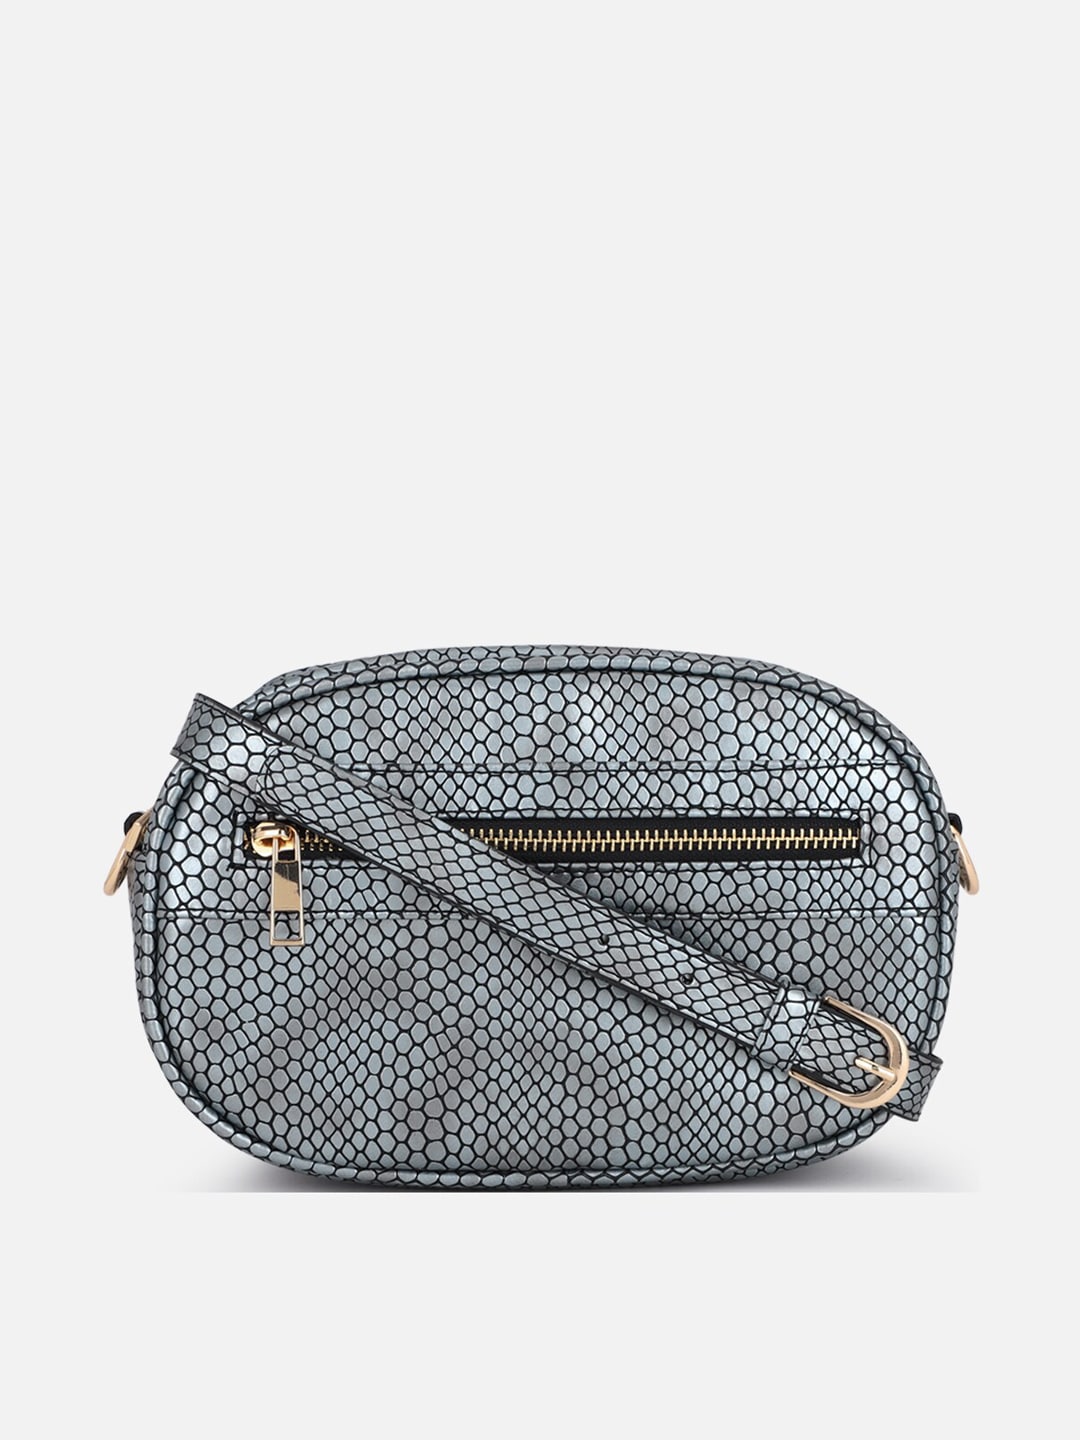 FOREVER 21 Grey Textured Swagger Sling Bag Price in India